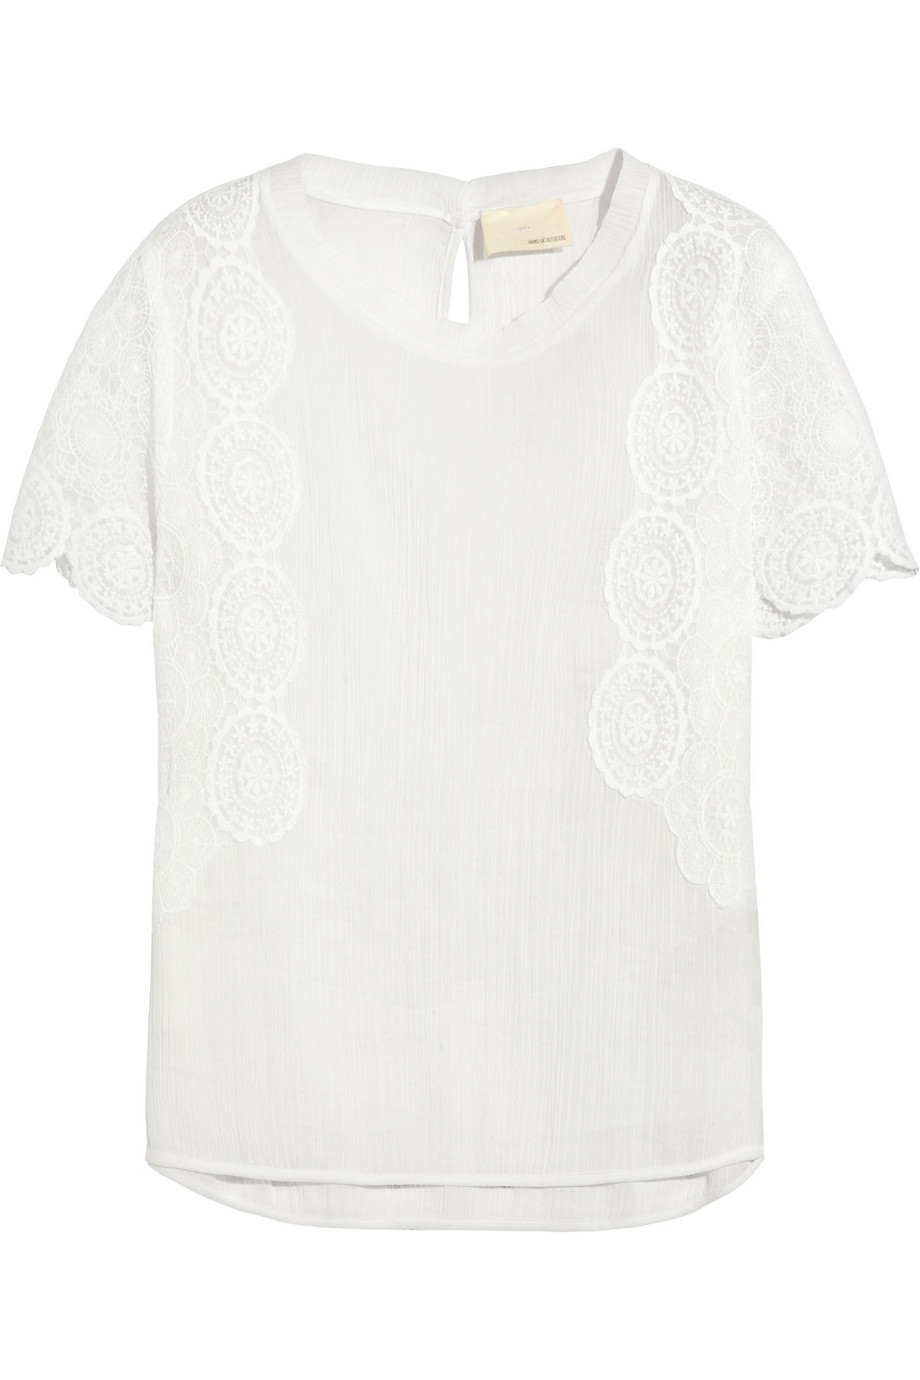 Band Of Outsiders Lace trimmed Cotton cheese-cloth Top in White | Lyst